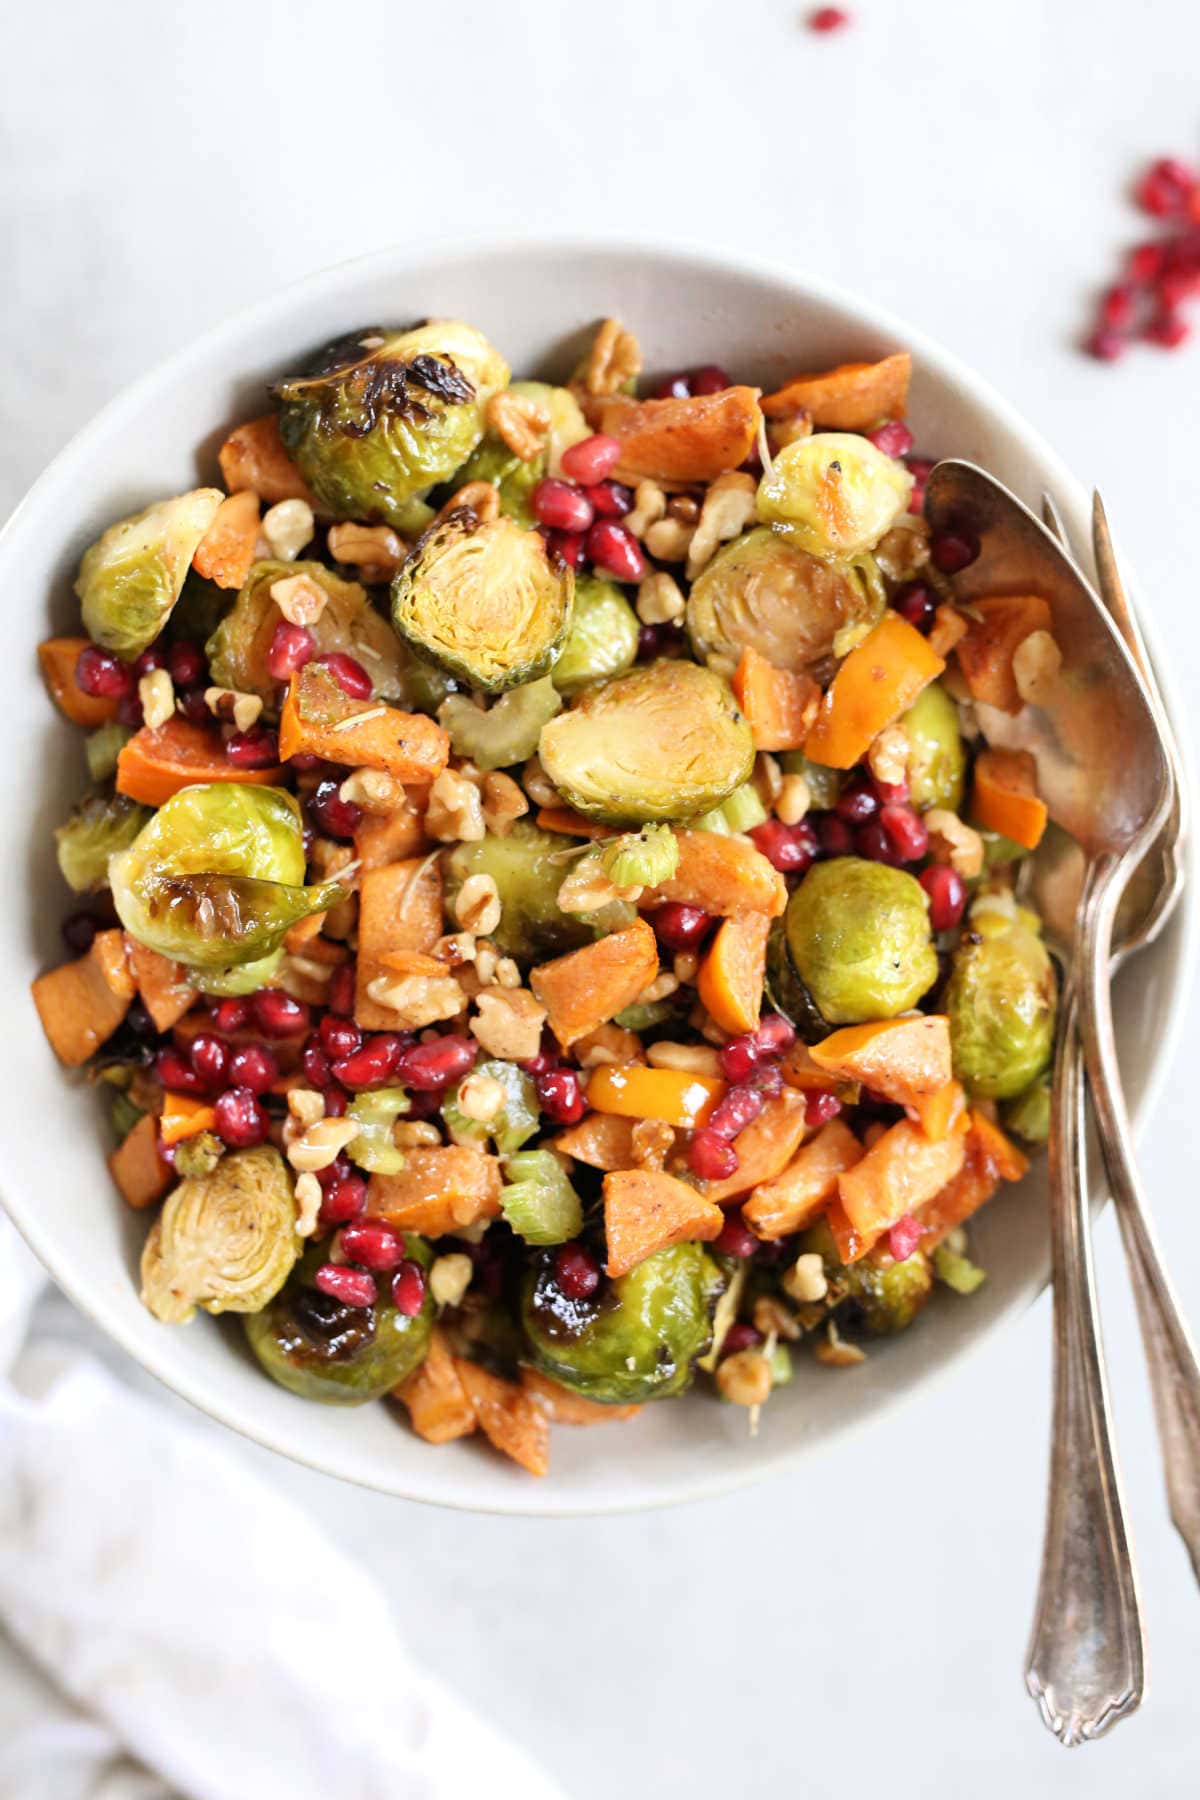 Roasted salad made with brussels sprouts in a bowl with a serving spoon and fork